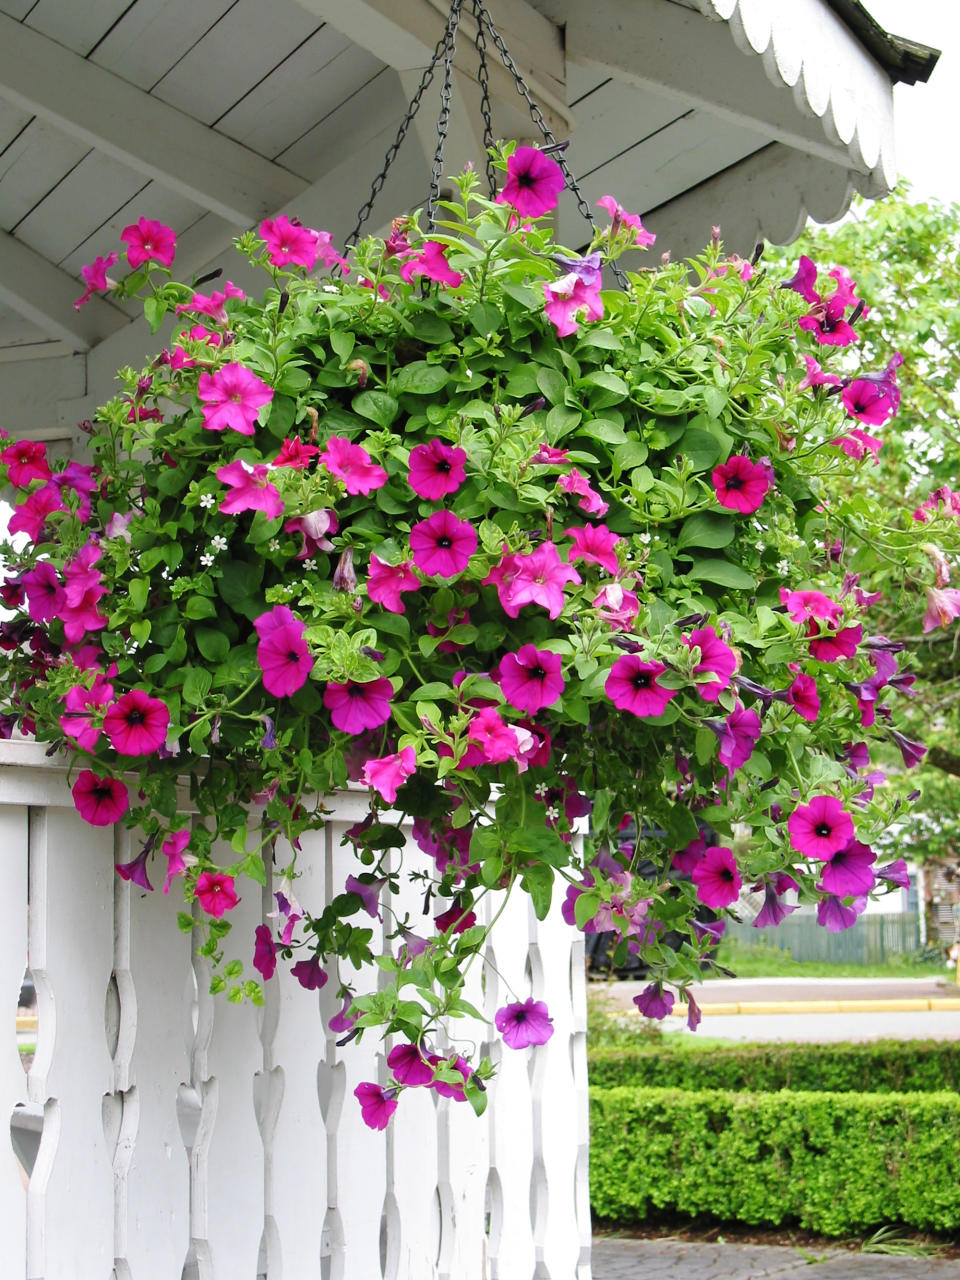 <p> &#x2018;Petunias are a great choice for hanging baskets,&#x2019; says Wildcraft. &#x2018;Aesthetically, they offer simple, minimalist beauty, normally available in only single or double color schemes. The way the plant hangs keeps tons of flowers on display &#x2013; there&apos;s no wasted flora here.&#x2019; </p> <p> Sears especially rates Easy Wave spreading petunias. &apos;They offer eye-catching color in a full, lush and mound-forming display. &#x2018;Spreading&#x2019; is in its name for good reason too &#x2013; these petunias spread and trail very fast in baskets and landscapes that receive full sun, creating that &#x2018;wave&#x2019; effect of showstopping color.&#x2019; </p> <p> Petunias are fairly easy to care for, but they really do need lots of sun in order to thrive. They do well in periods of heat and drought.&#xA0; </p> <p> Make sure you know how to deadhead petunias to maximize blooms. </p>